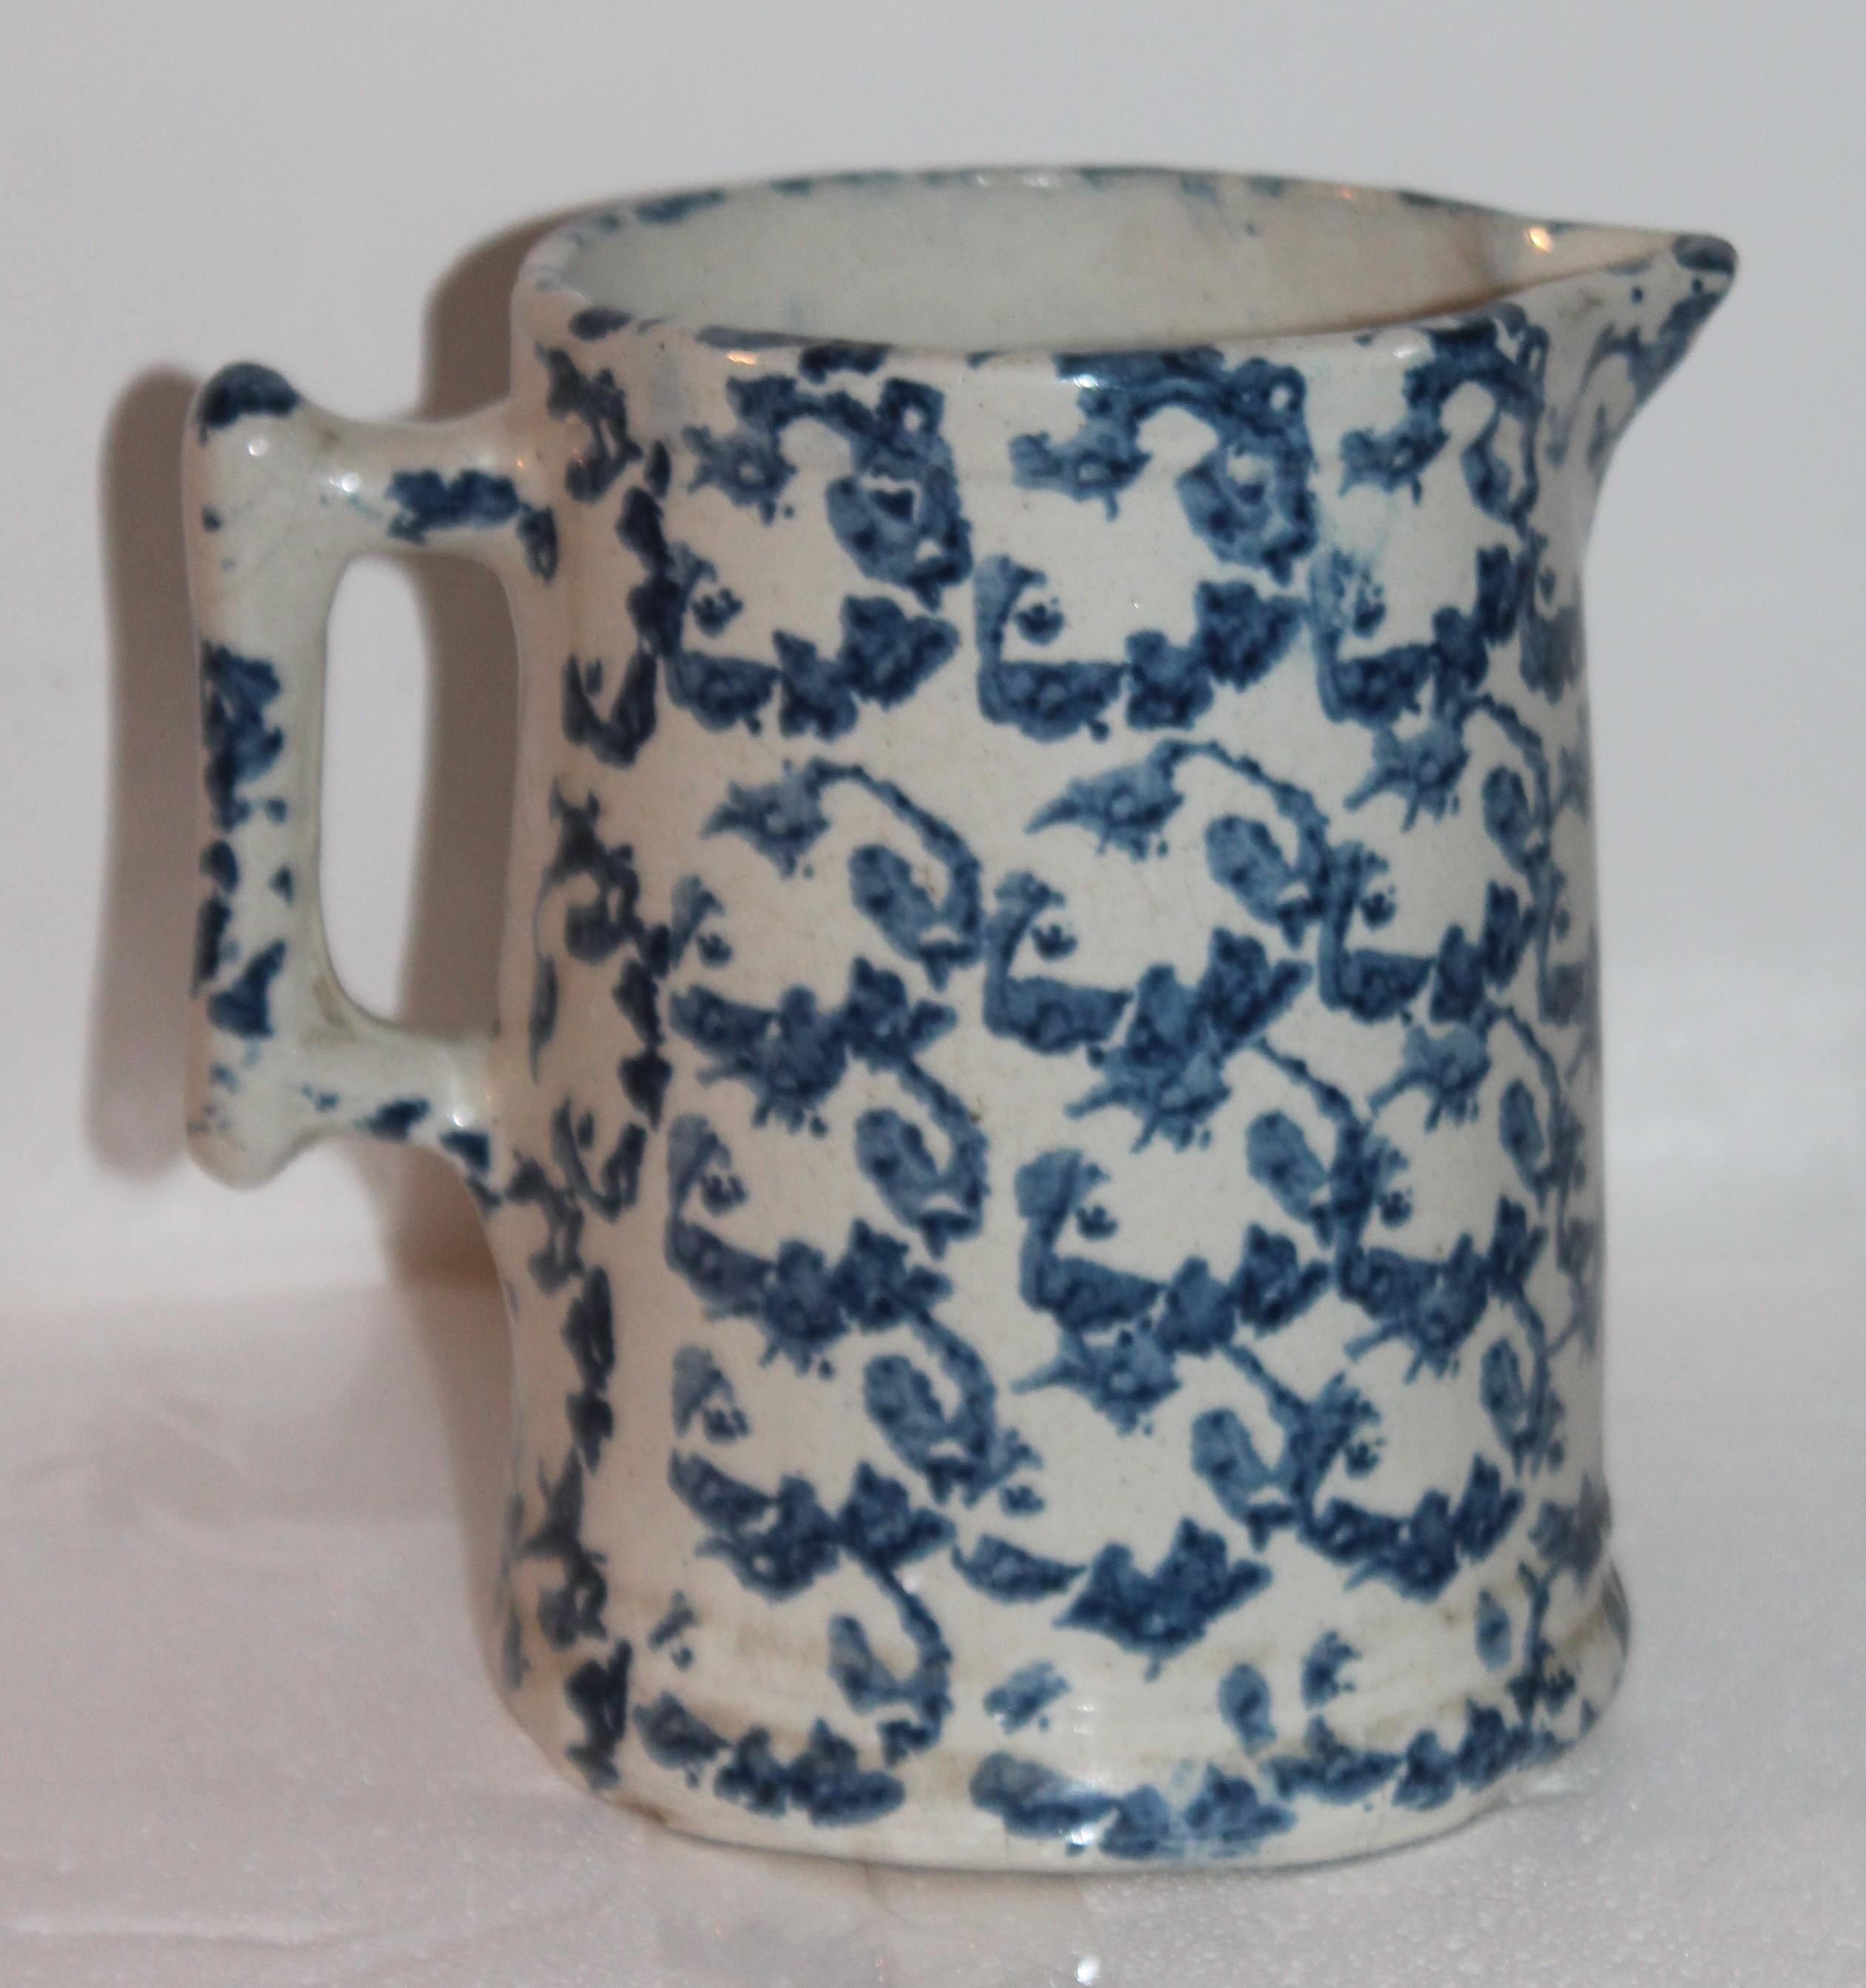 This fine and early 19th century patterned sponge ware pottery pitcher is in great condition. Most unusual pattern looks like flowers.